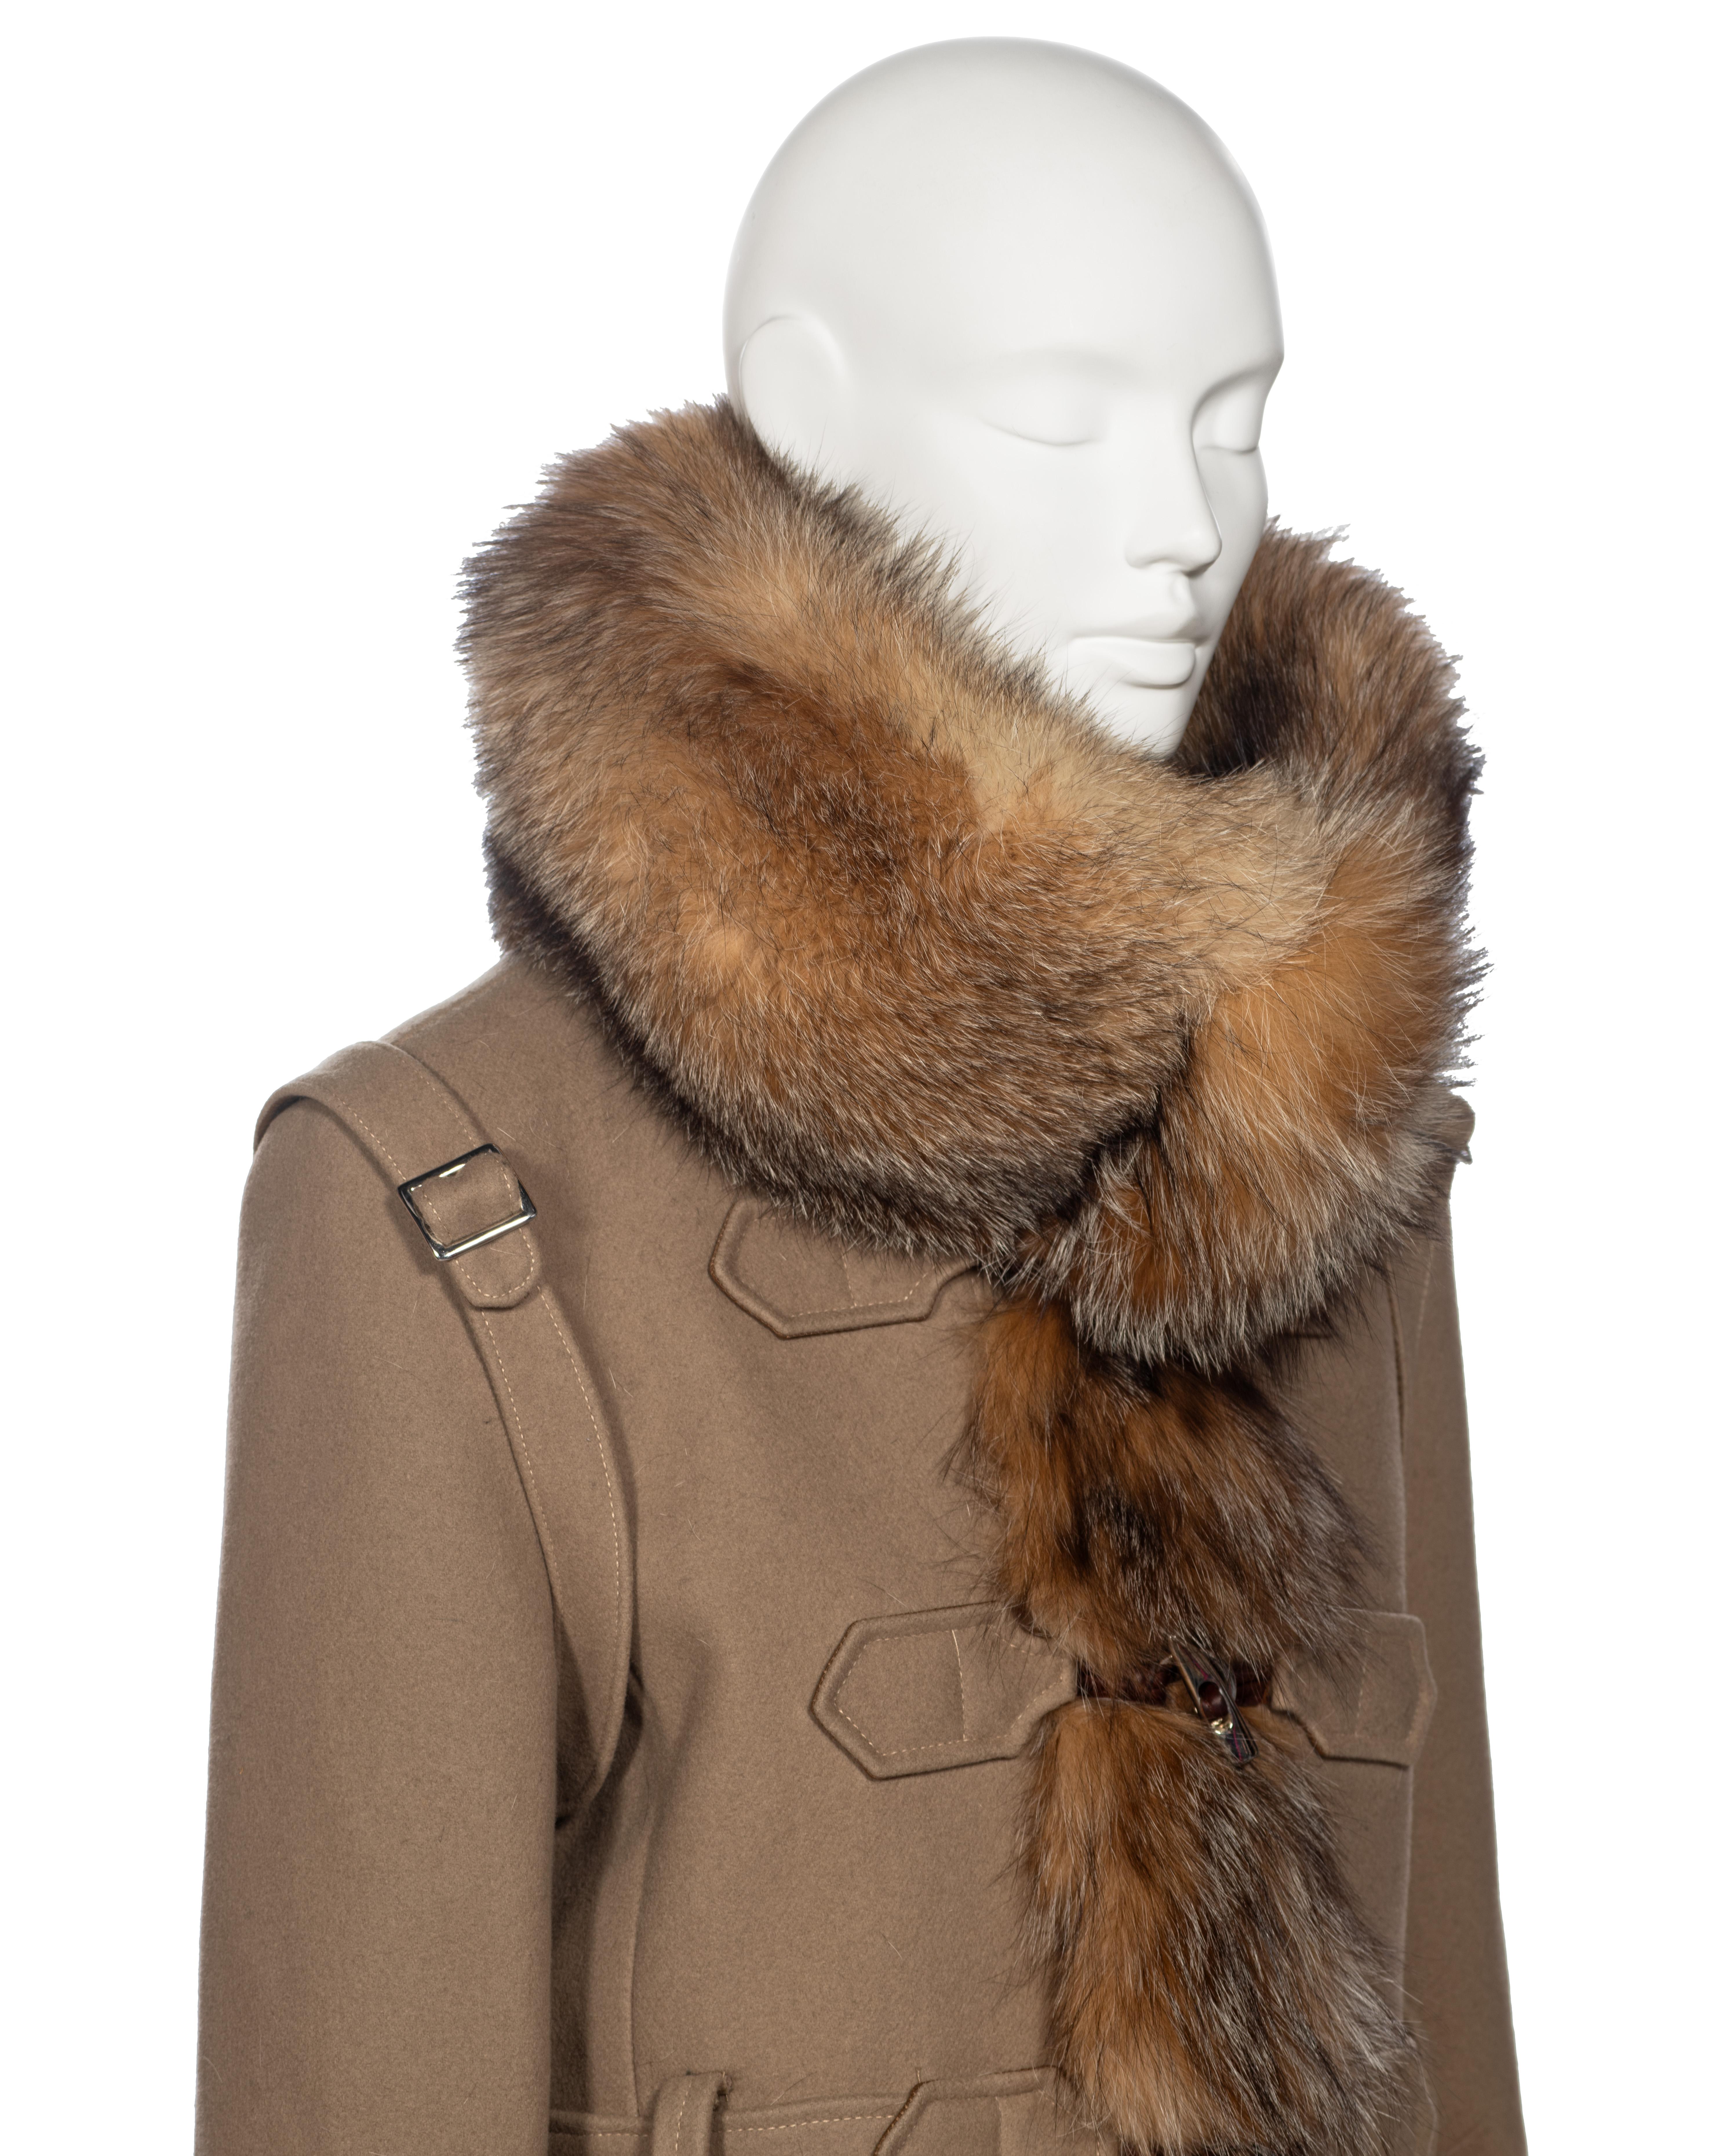 Balenciaga by Nicolas Ghesquière Fur-Trimmed Felted Wool Duffle Coat, fw 2005 For Sale 5